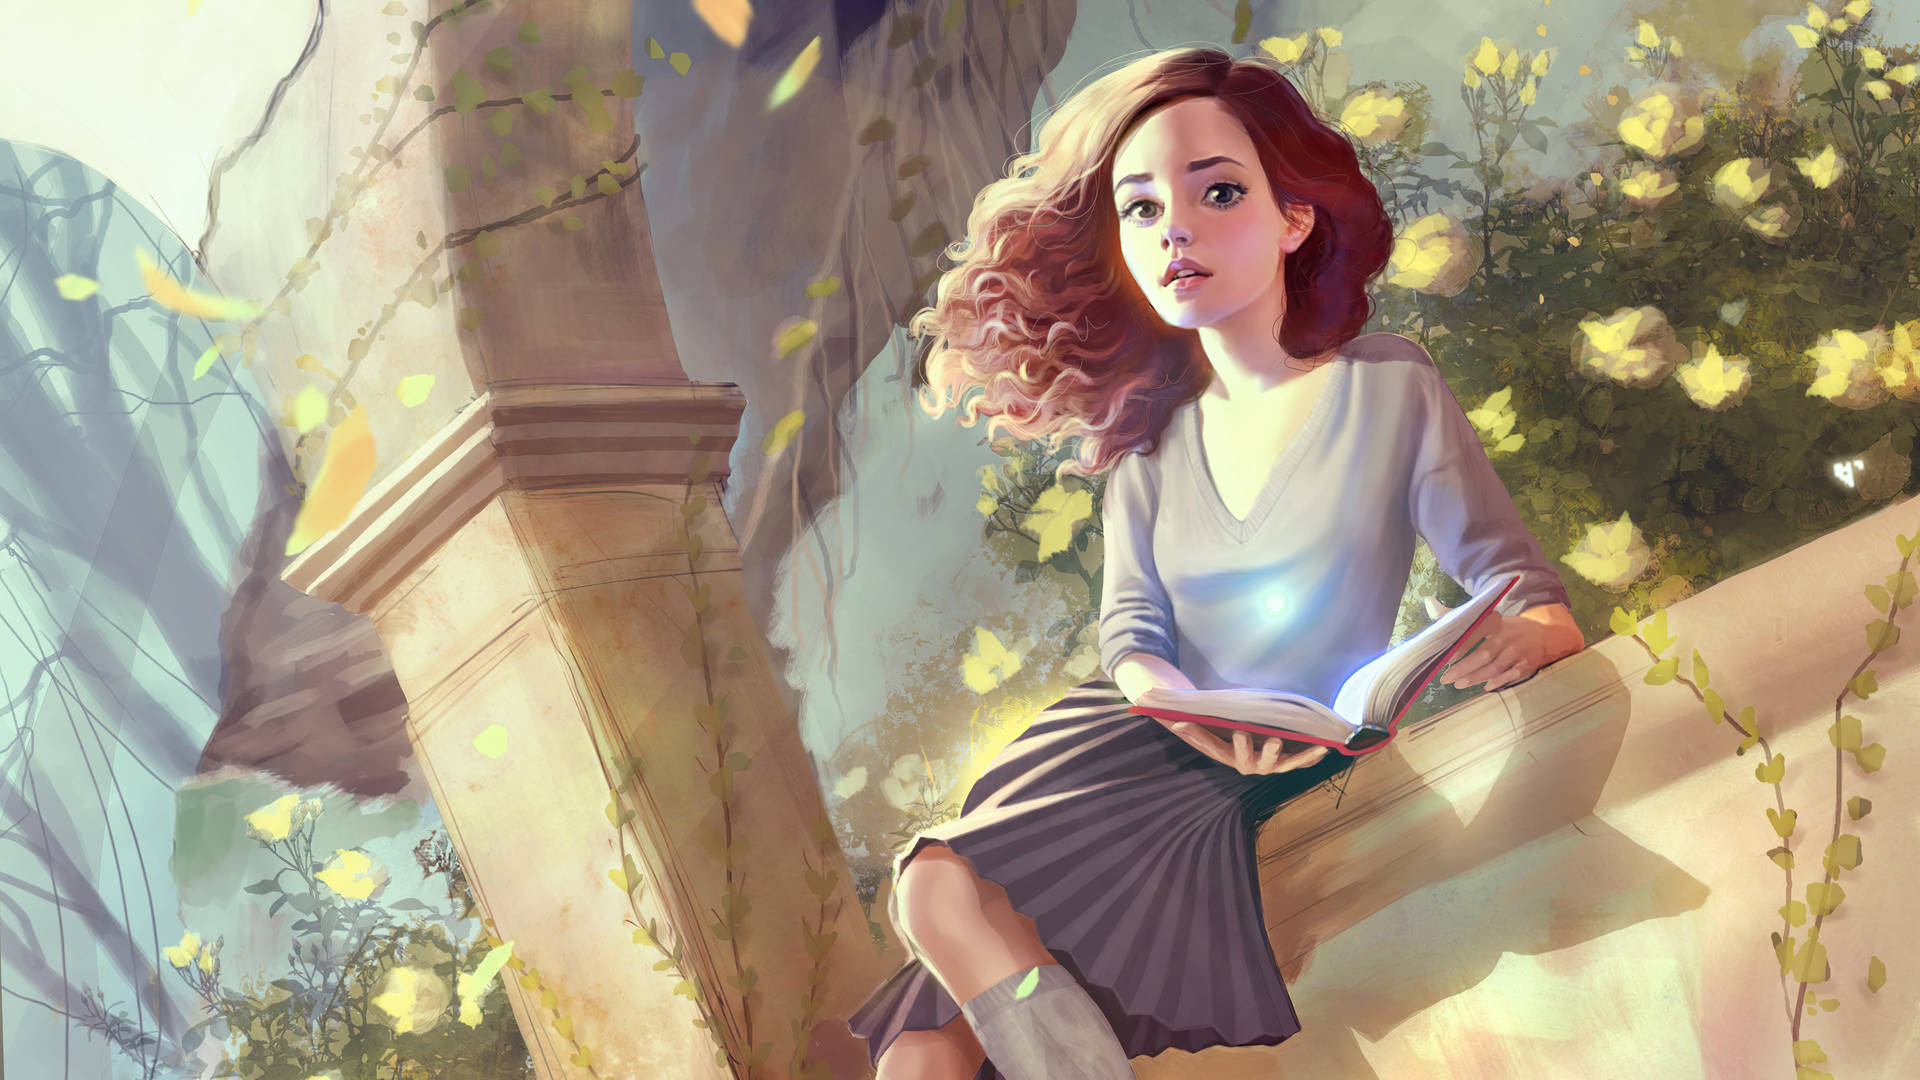 "Meet Hermione Granger, brave and brilliant witch from the Harry Potter series" Wallpaper